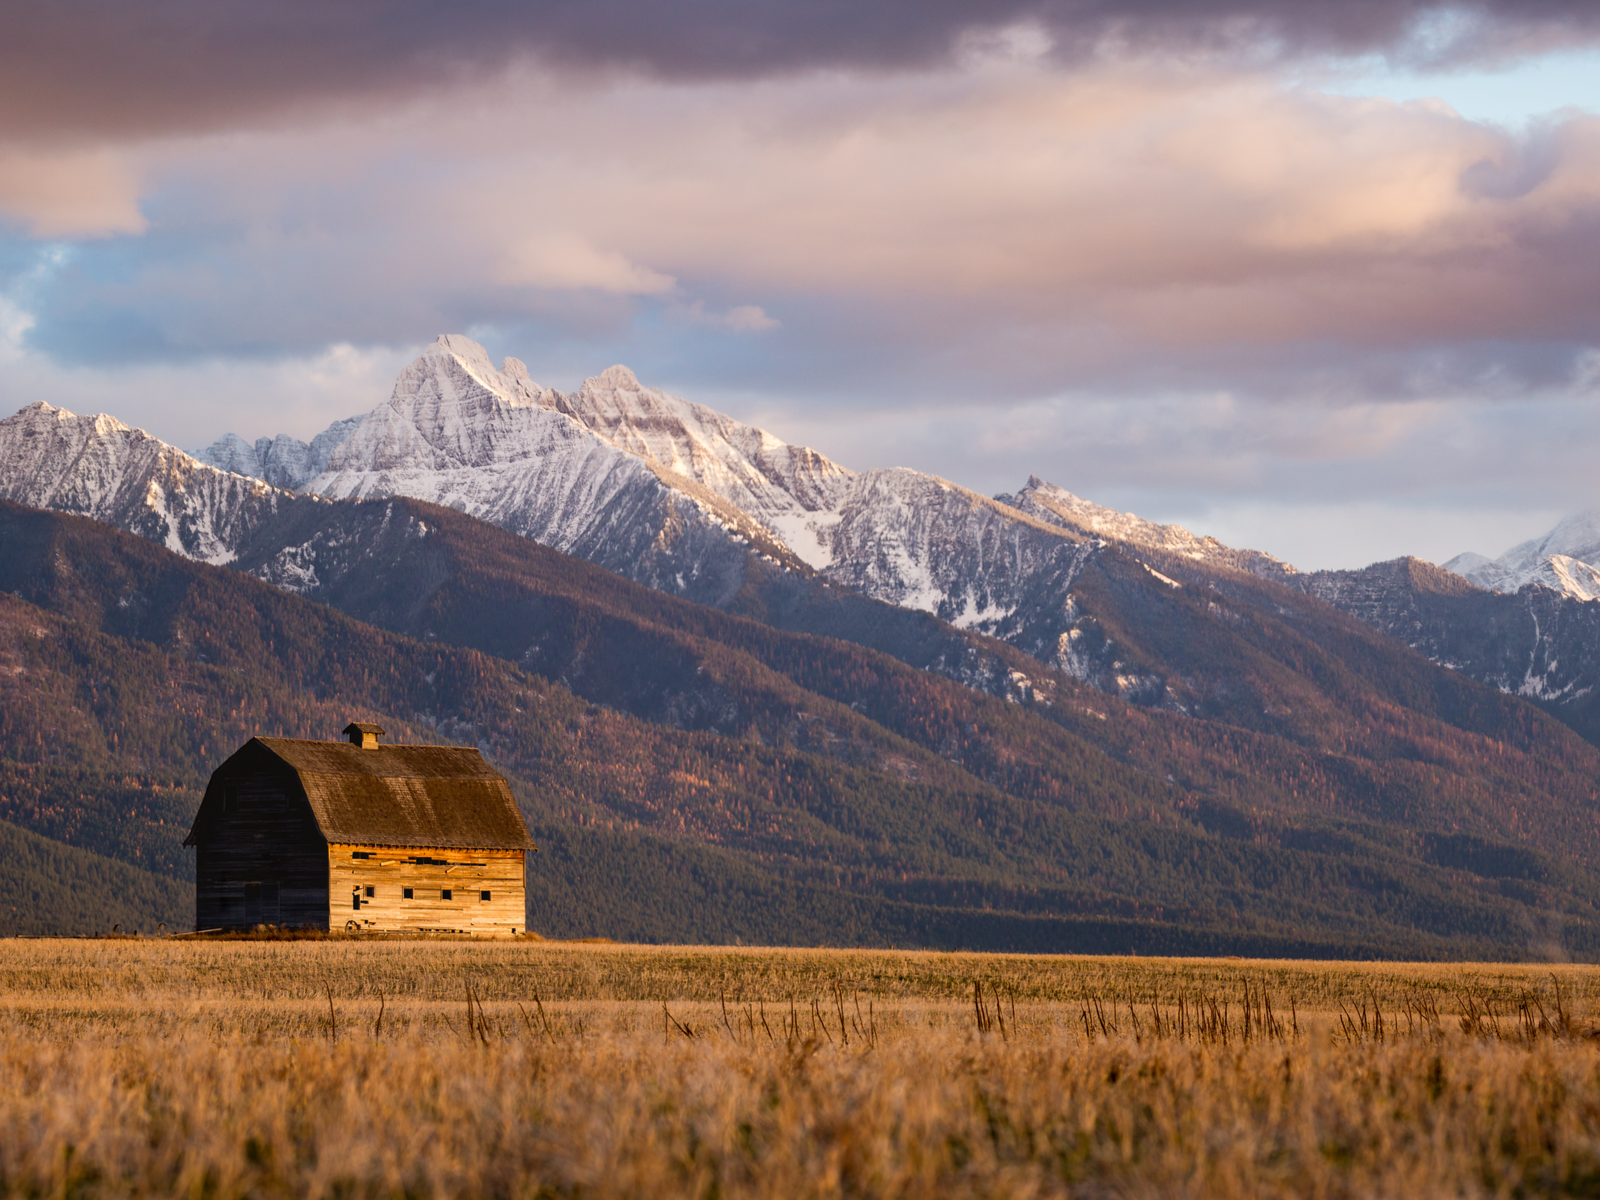 A lonely old barn at a valley bellow snowy peak mountain ridges in Pablo, one of the best things to do in Montana